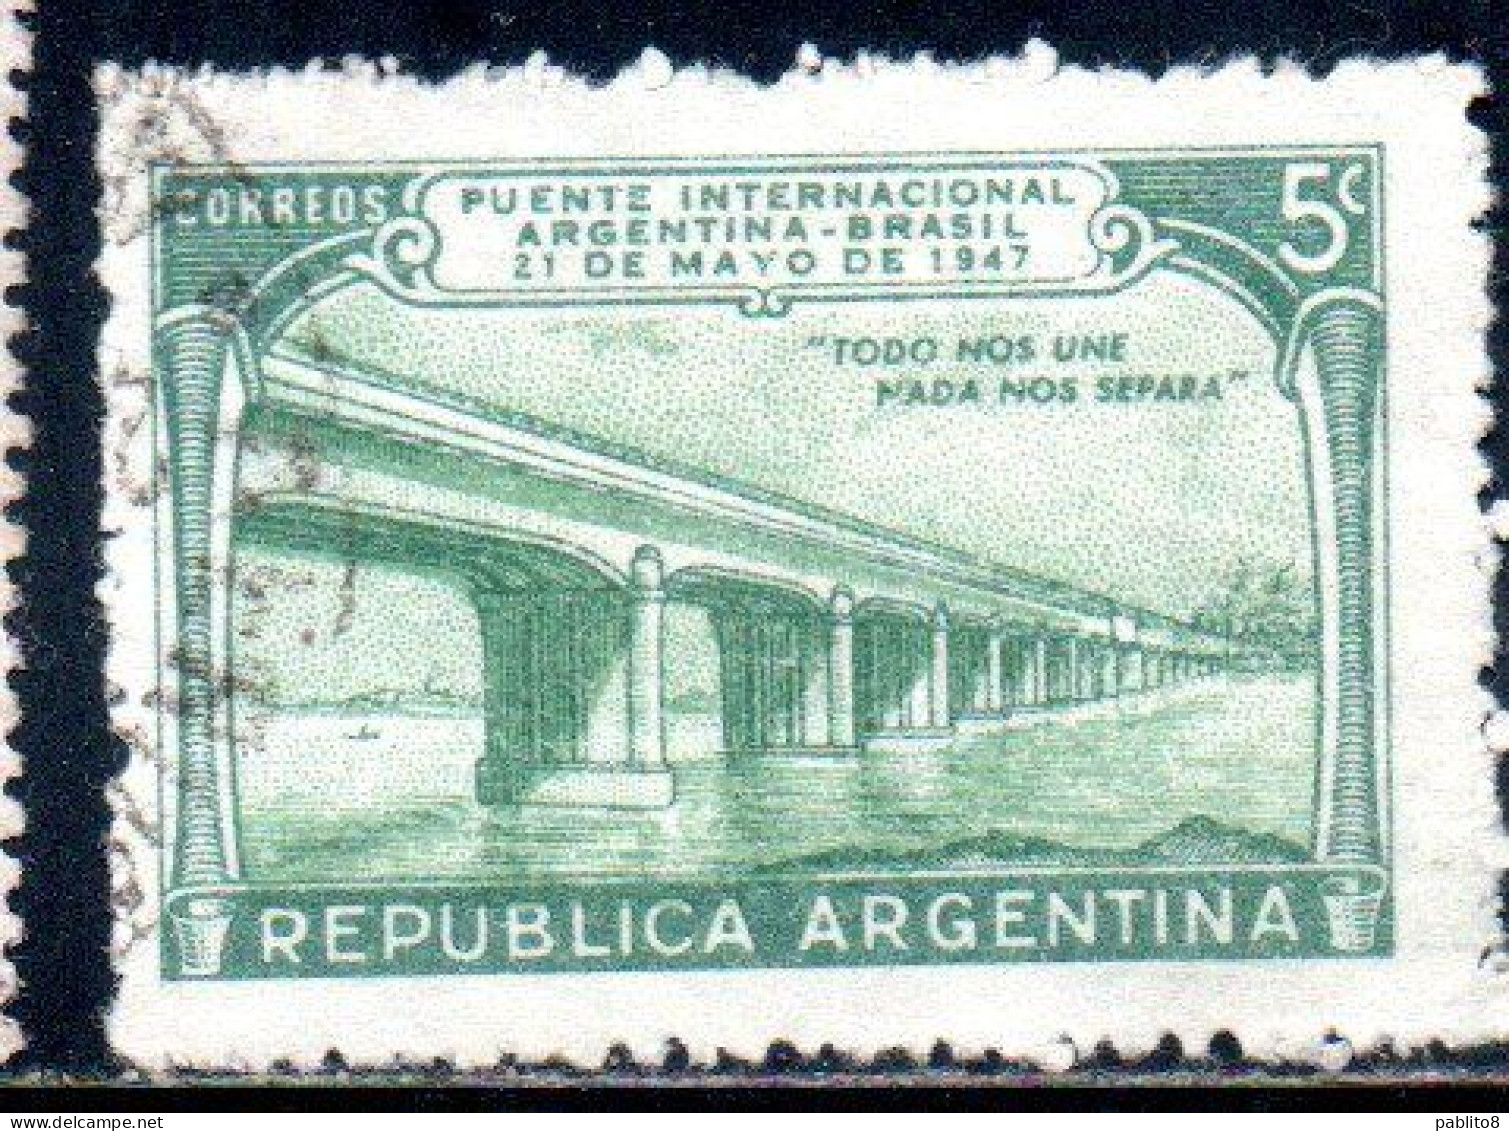 ARGENTINA 1947 OPENING CONNECTING WITH BRAZIL INTERNATIONAL BRIDGE 5c USED USADO OBLITERE' - Used Stamps